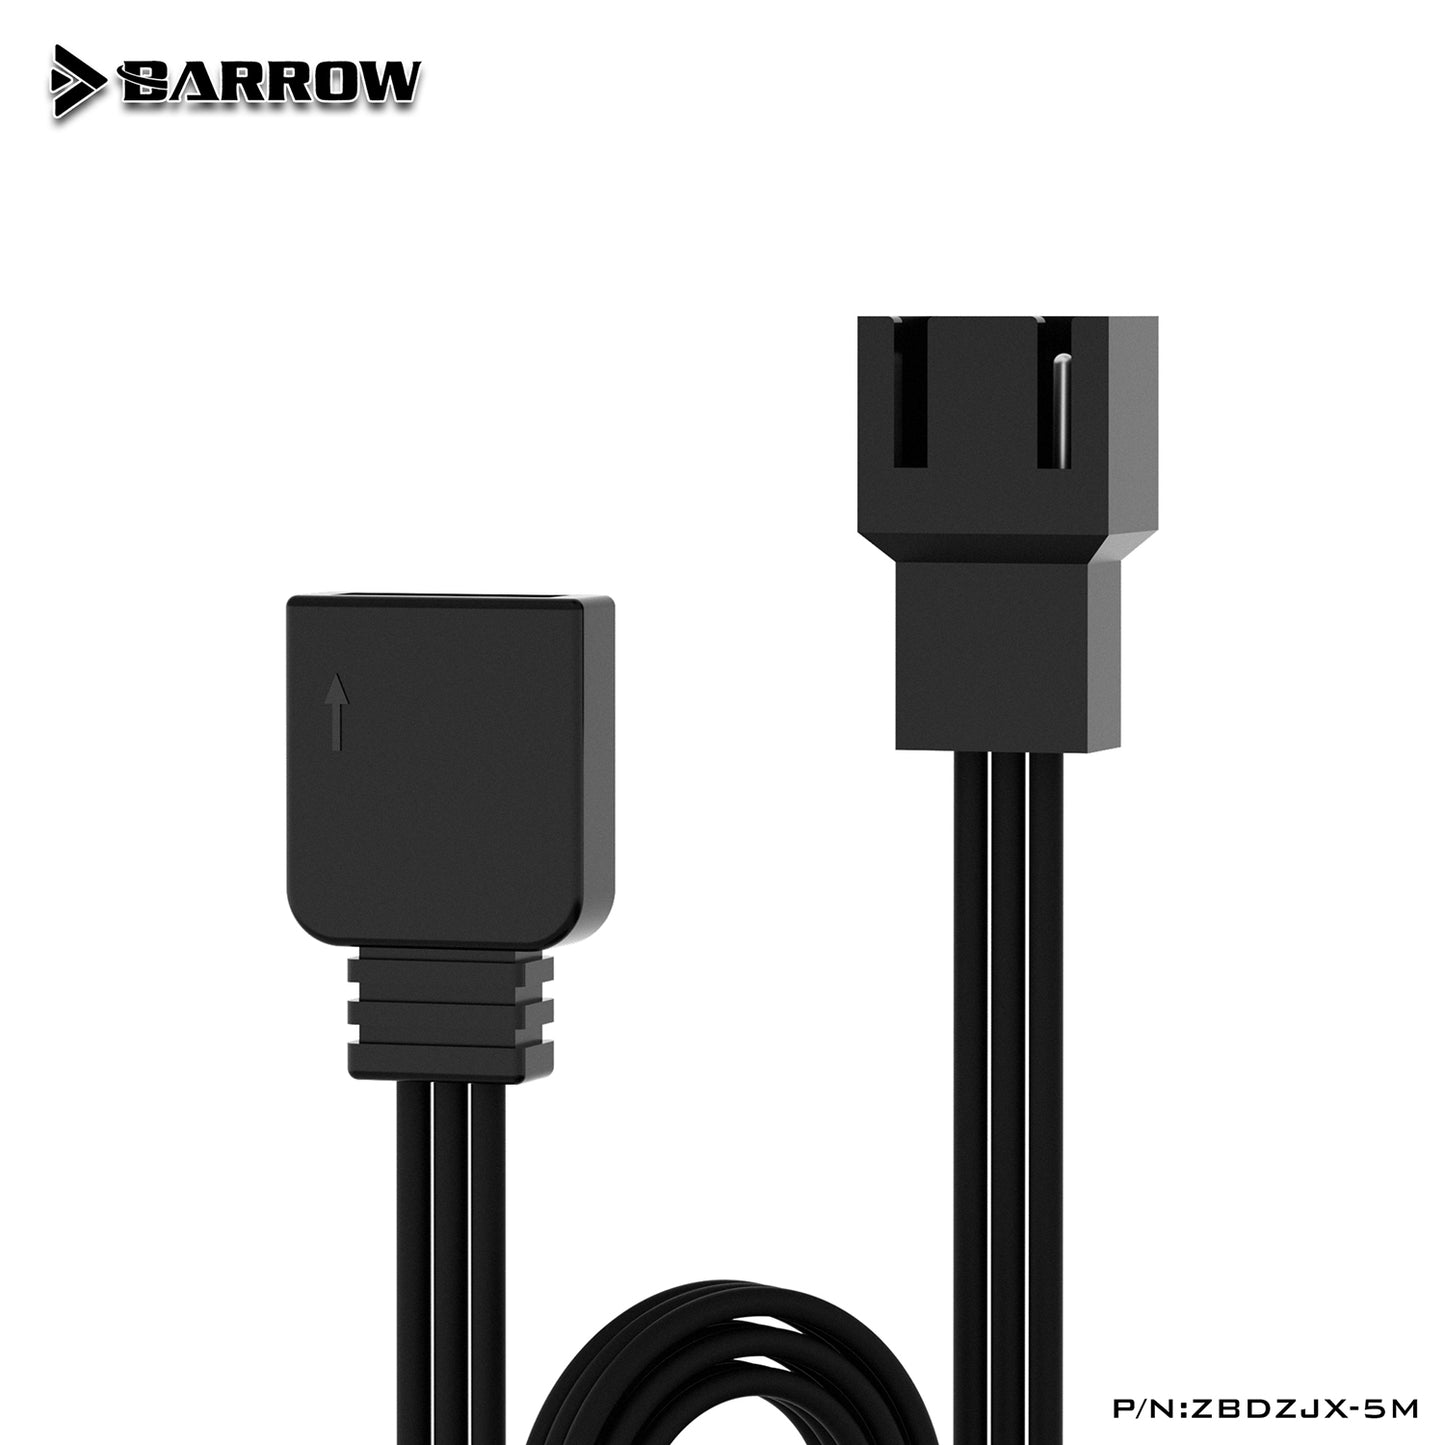 Barrow Motherboard Synchronization Cable, For Barrow 5v Lighting Strip Suitable, For Motherboard 5v 3pin Interface, ZBDZJX-5M